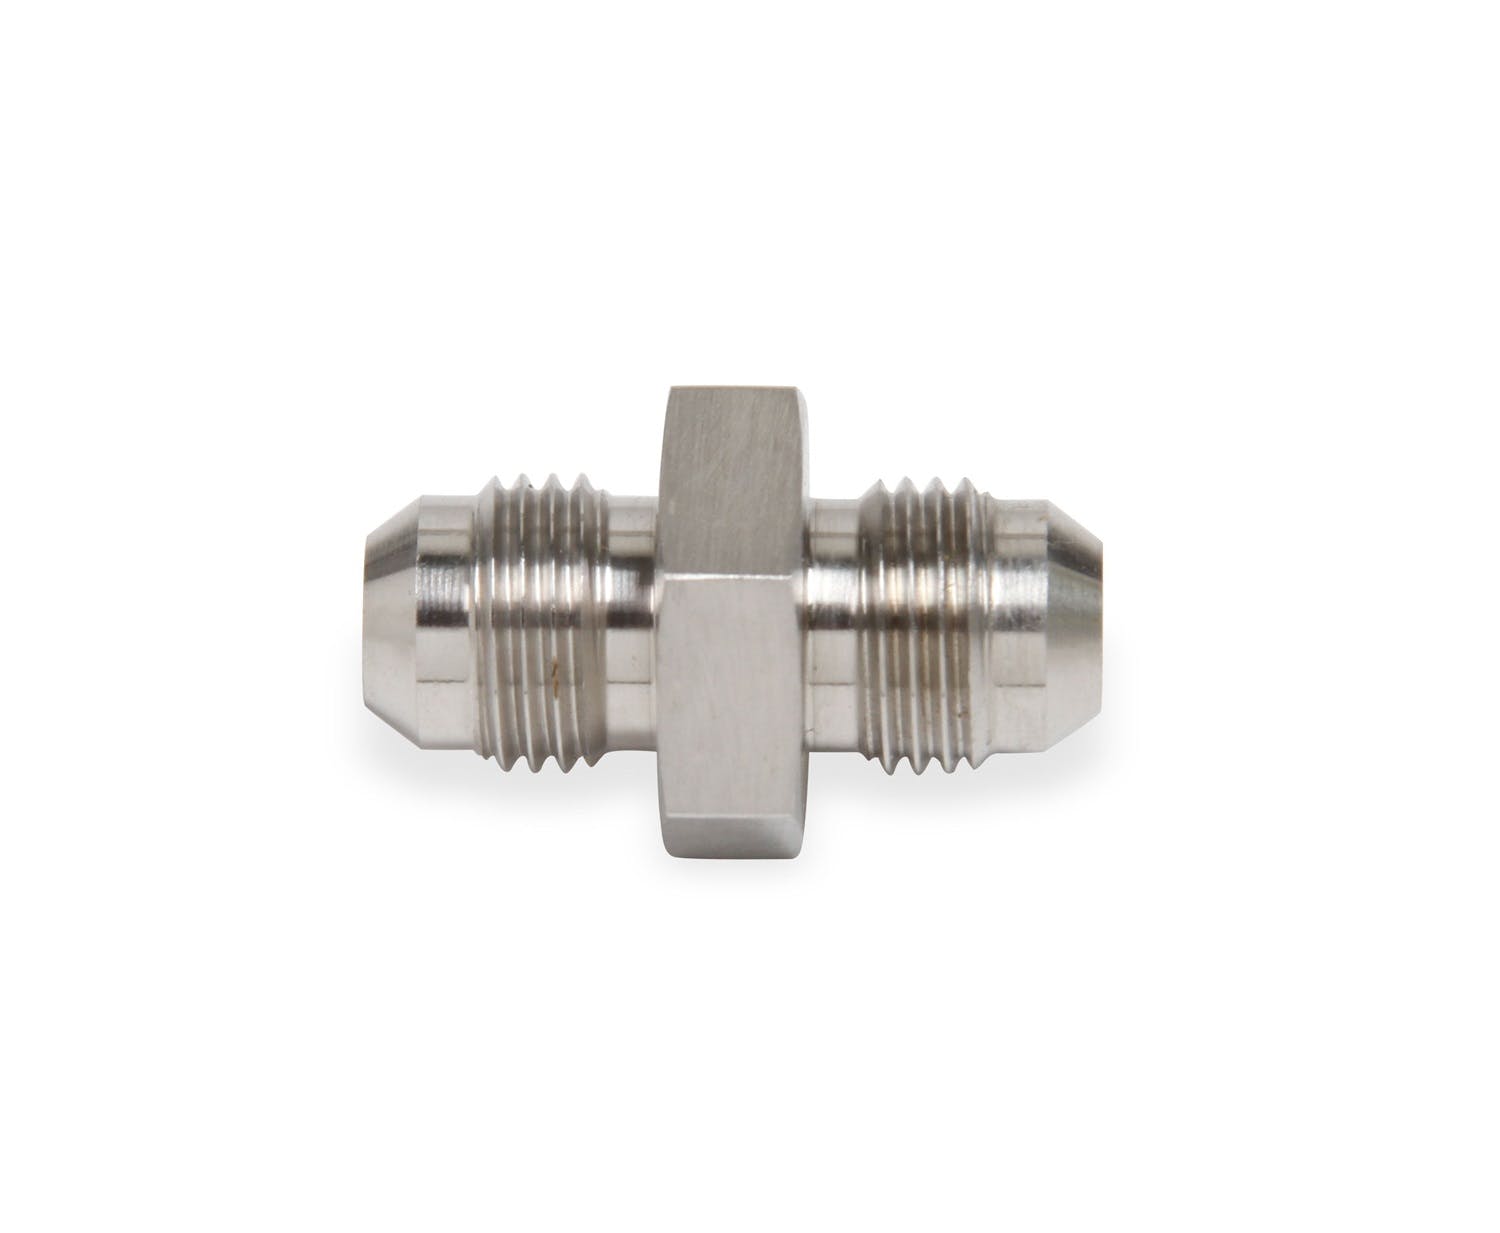 Earl's Performance Plumbing SS981508ERL -8 UNION STAINLESS STEEL